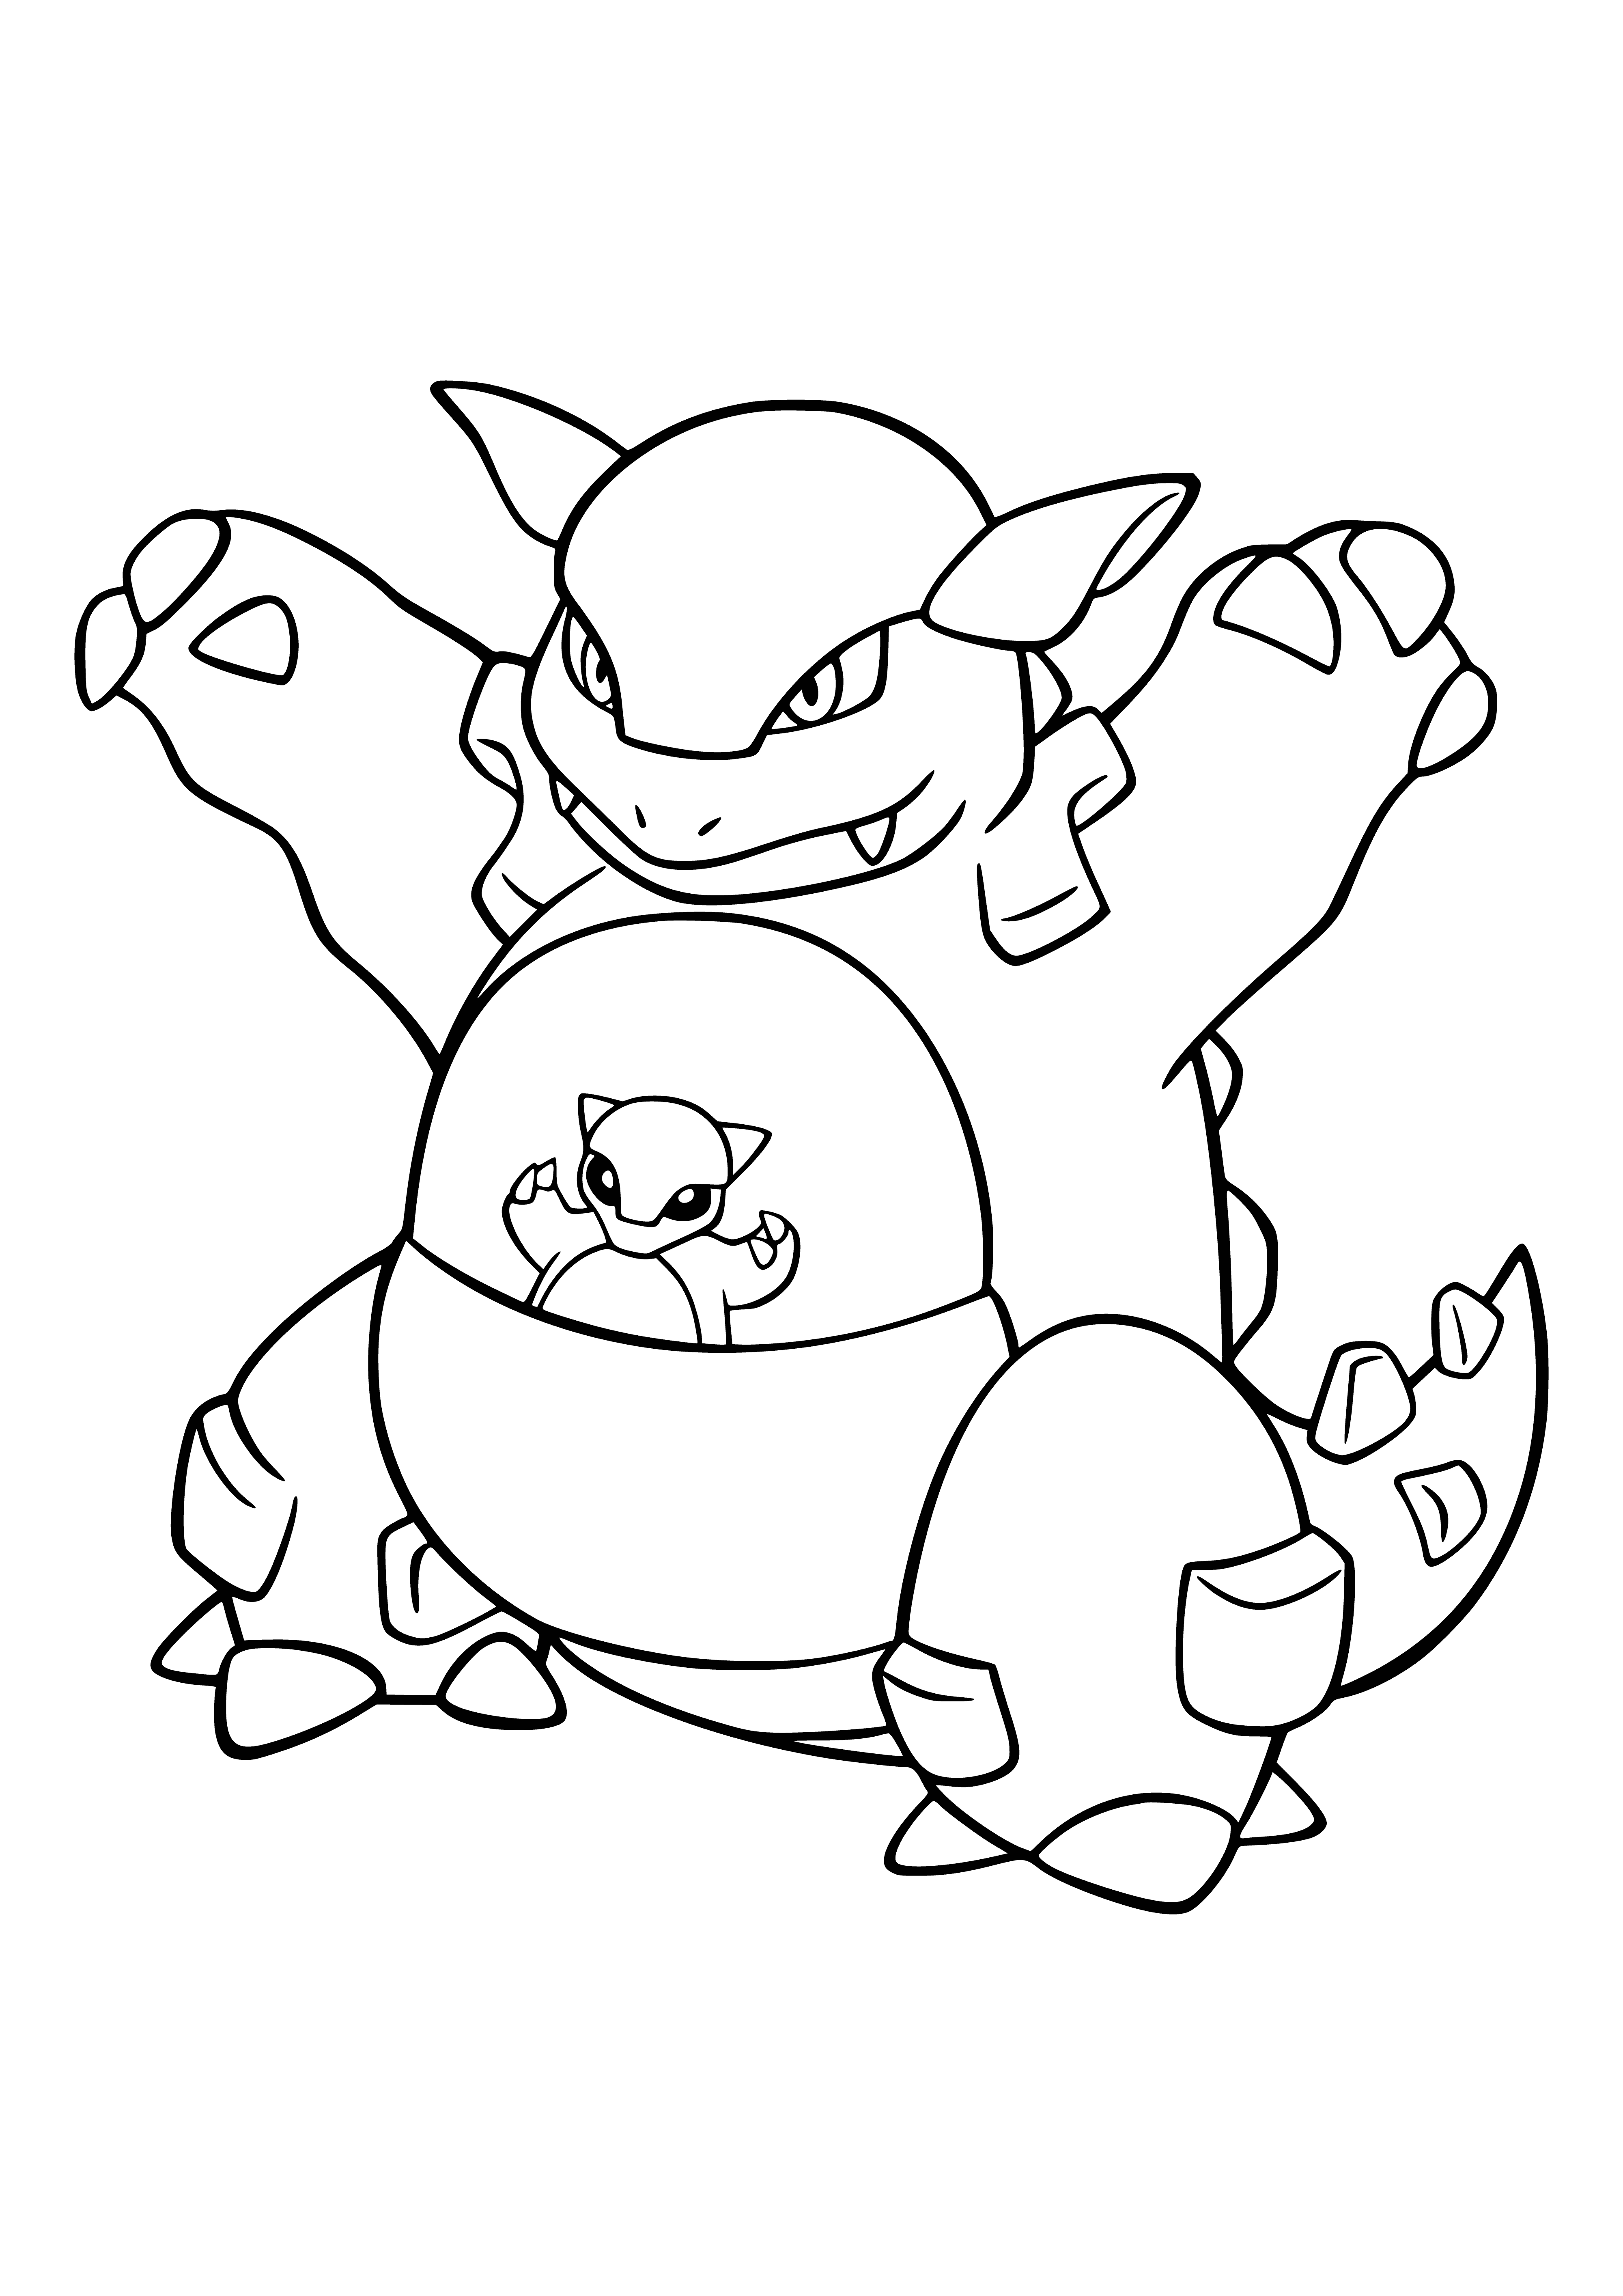 coloring page: Large, bipedal Pokémon w/ tan fur & pouch on belly, small eyes & round mouth, stubby arms & 3 clawed fingers. Carries young in pouch.